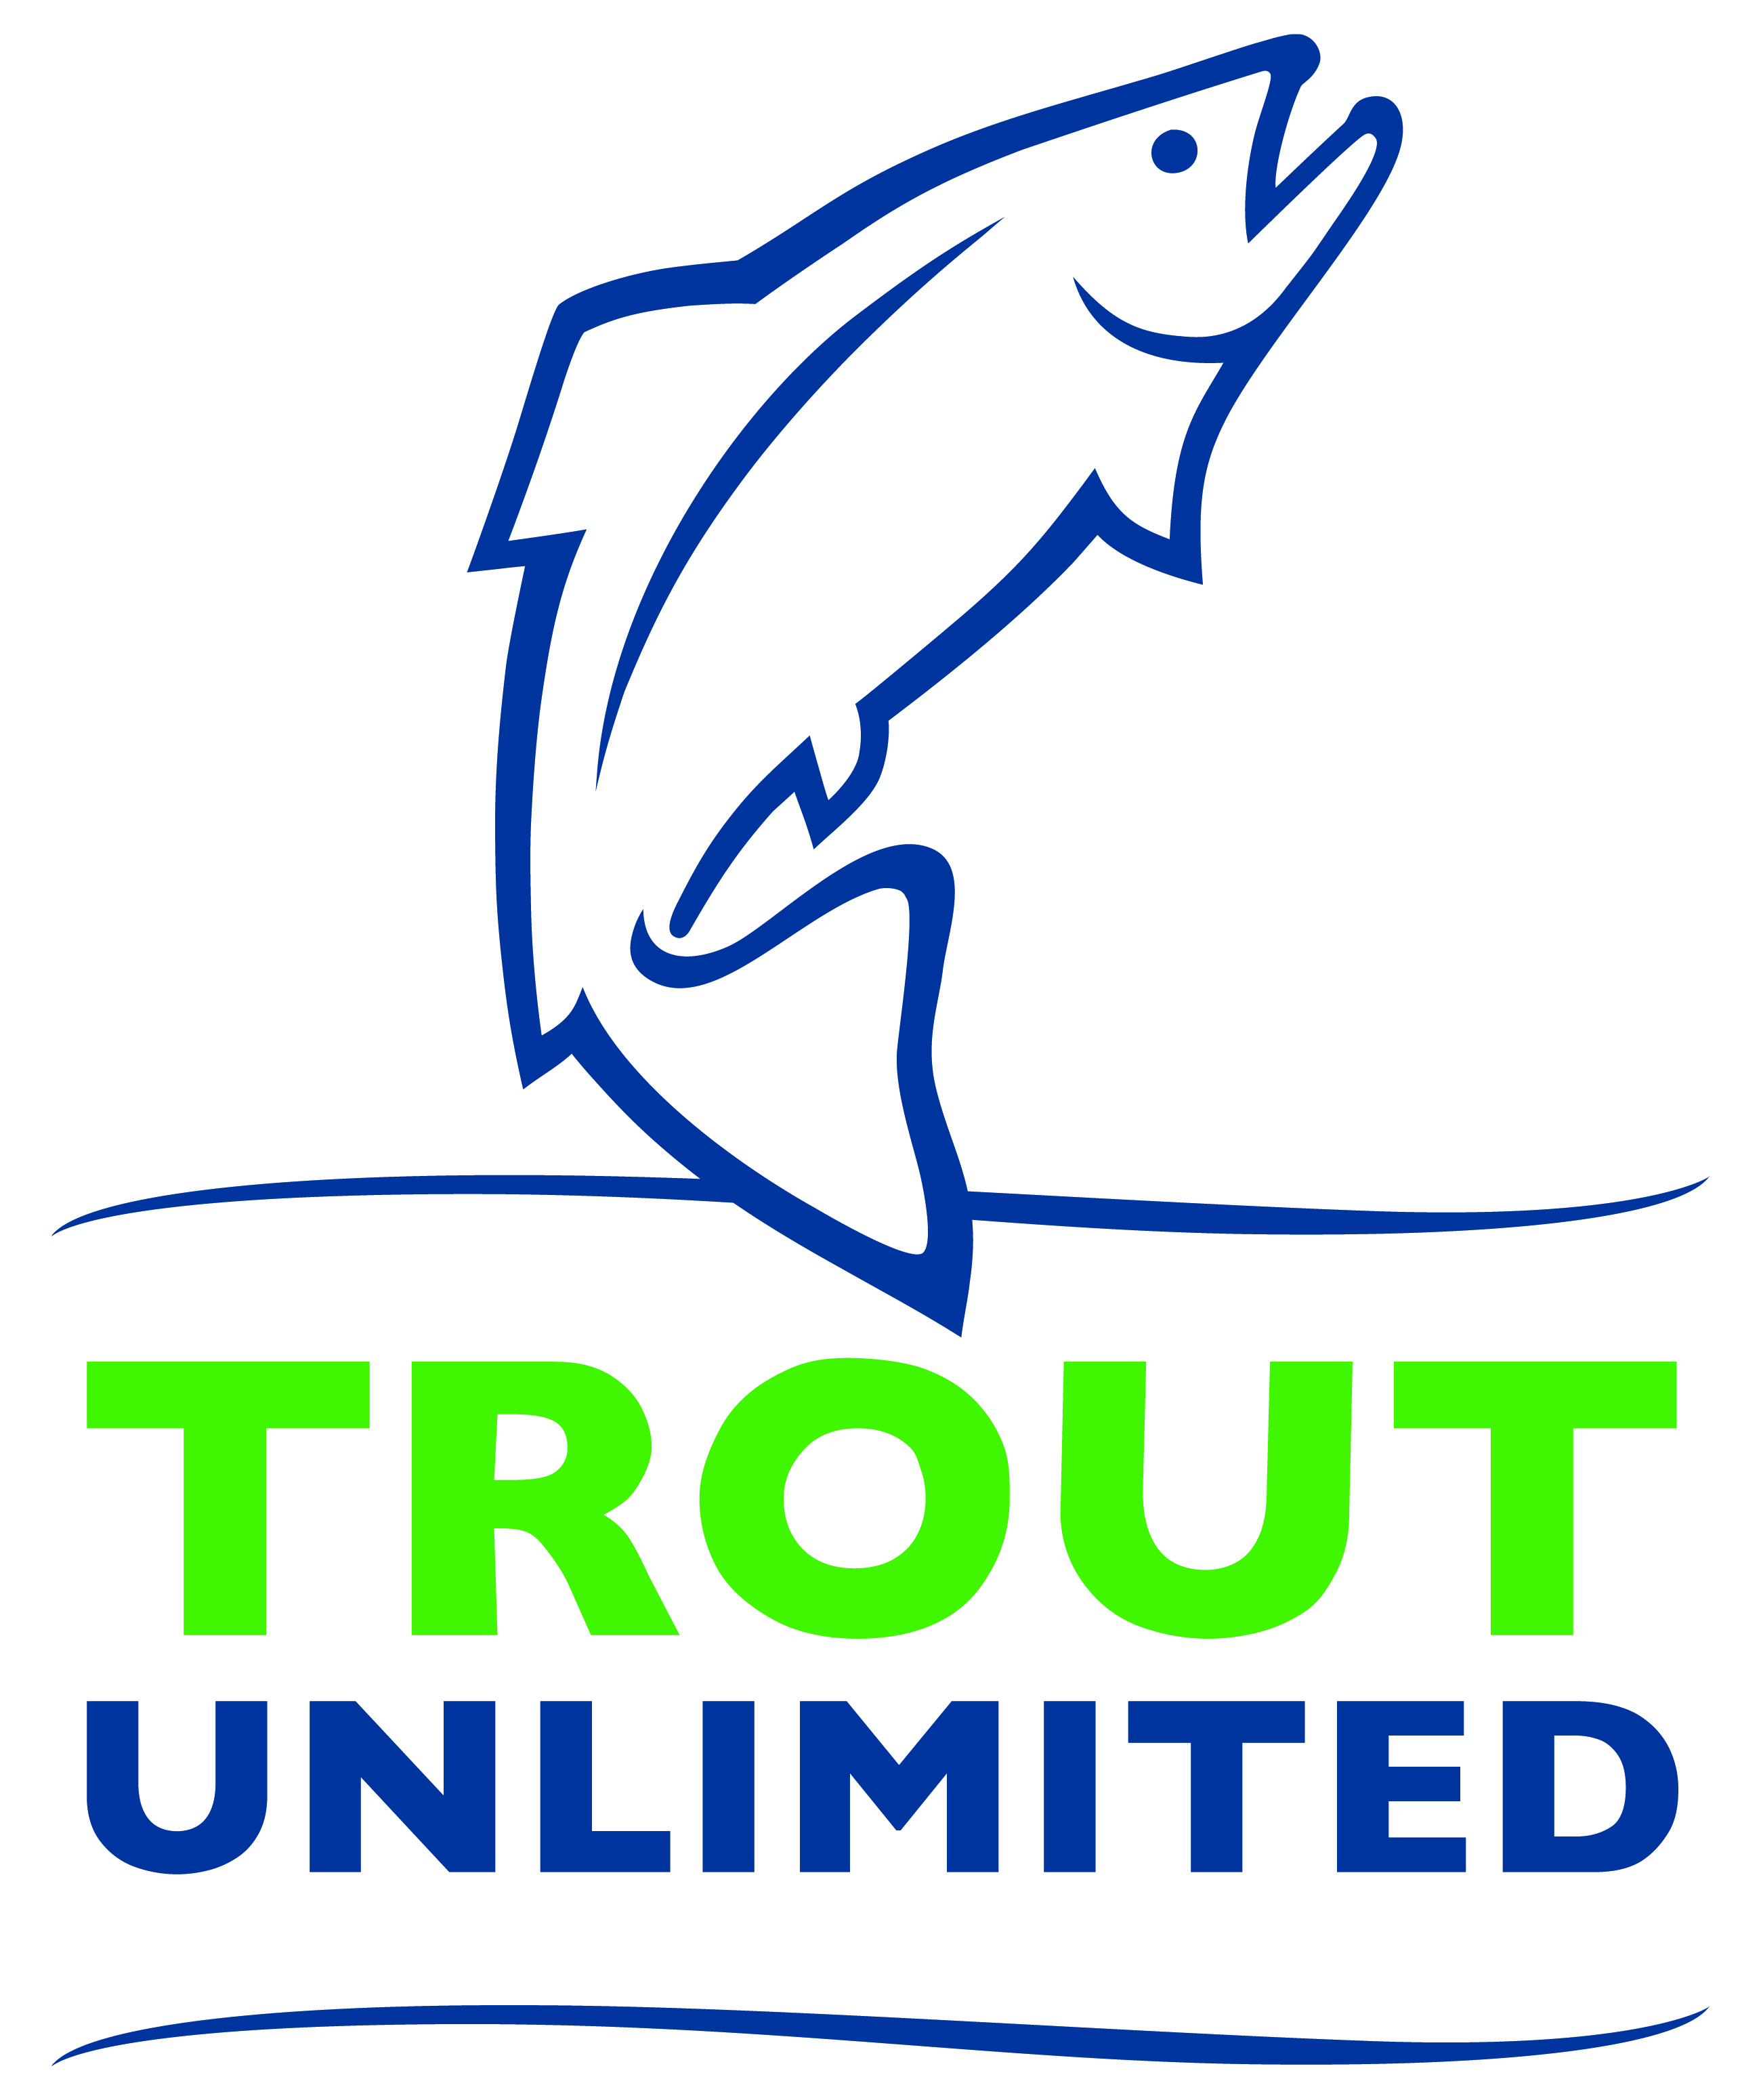 A logo with the words Trout Unlimited and a graphic of a trout.